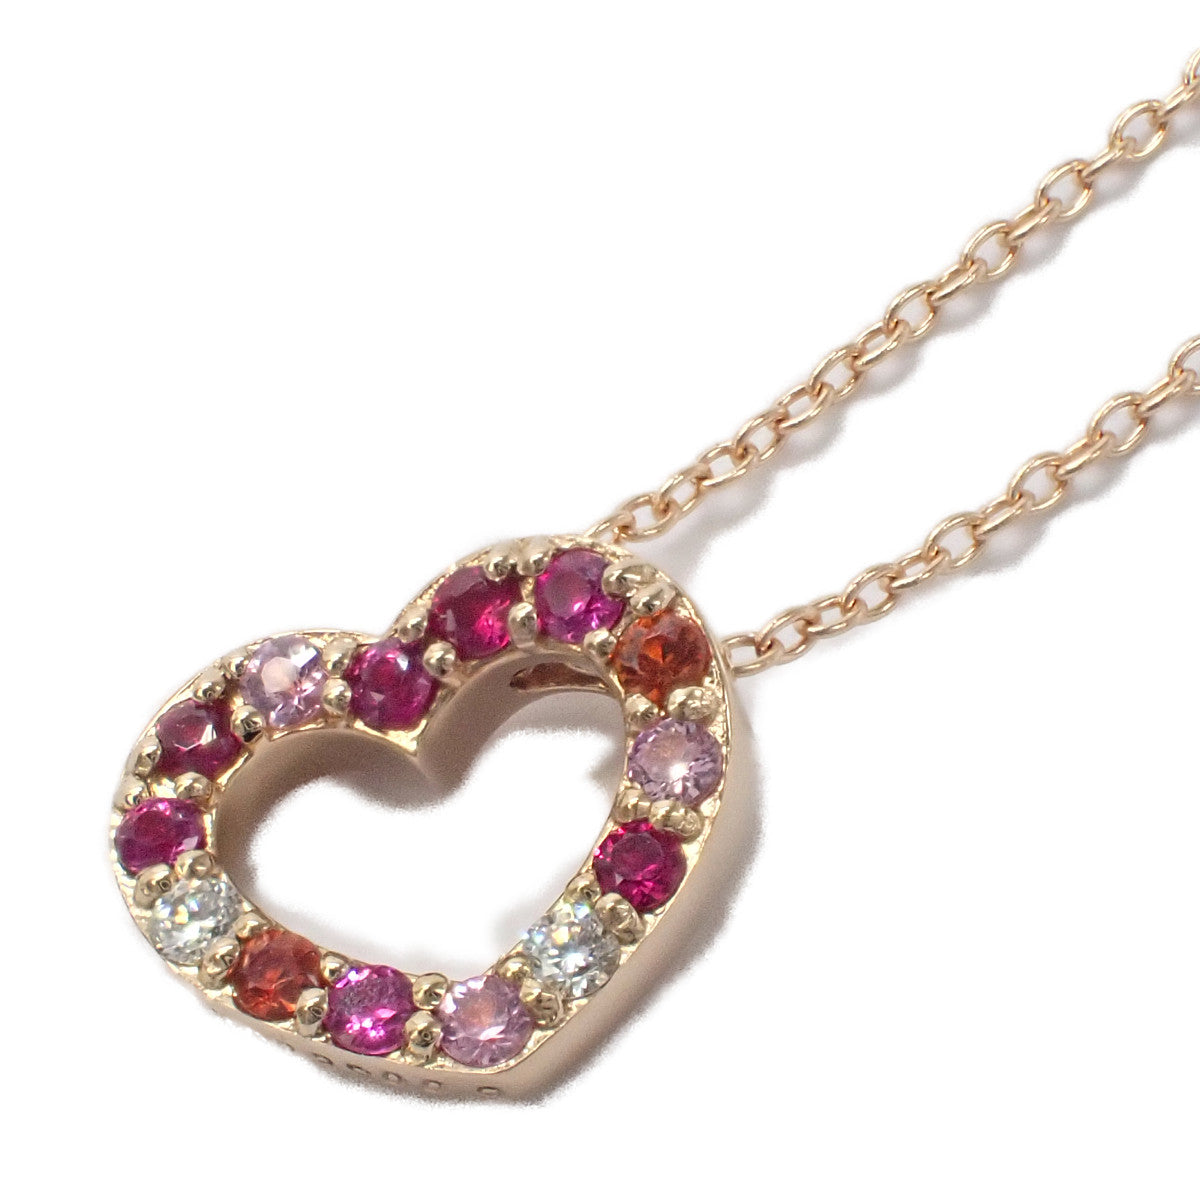 [LuxUness]  Ponte Vecchio Emozione Pompermo Heart Motif Necklace with Diamond 0.02ct, Ruby 0.03ct, Sapphire 0.09ct in K18 Pink Gold for Women (Used) in Excellent condition